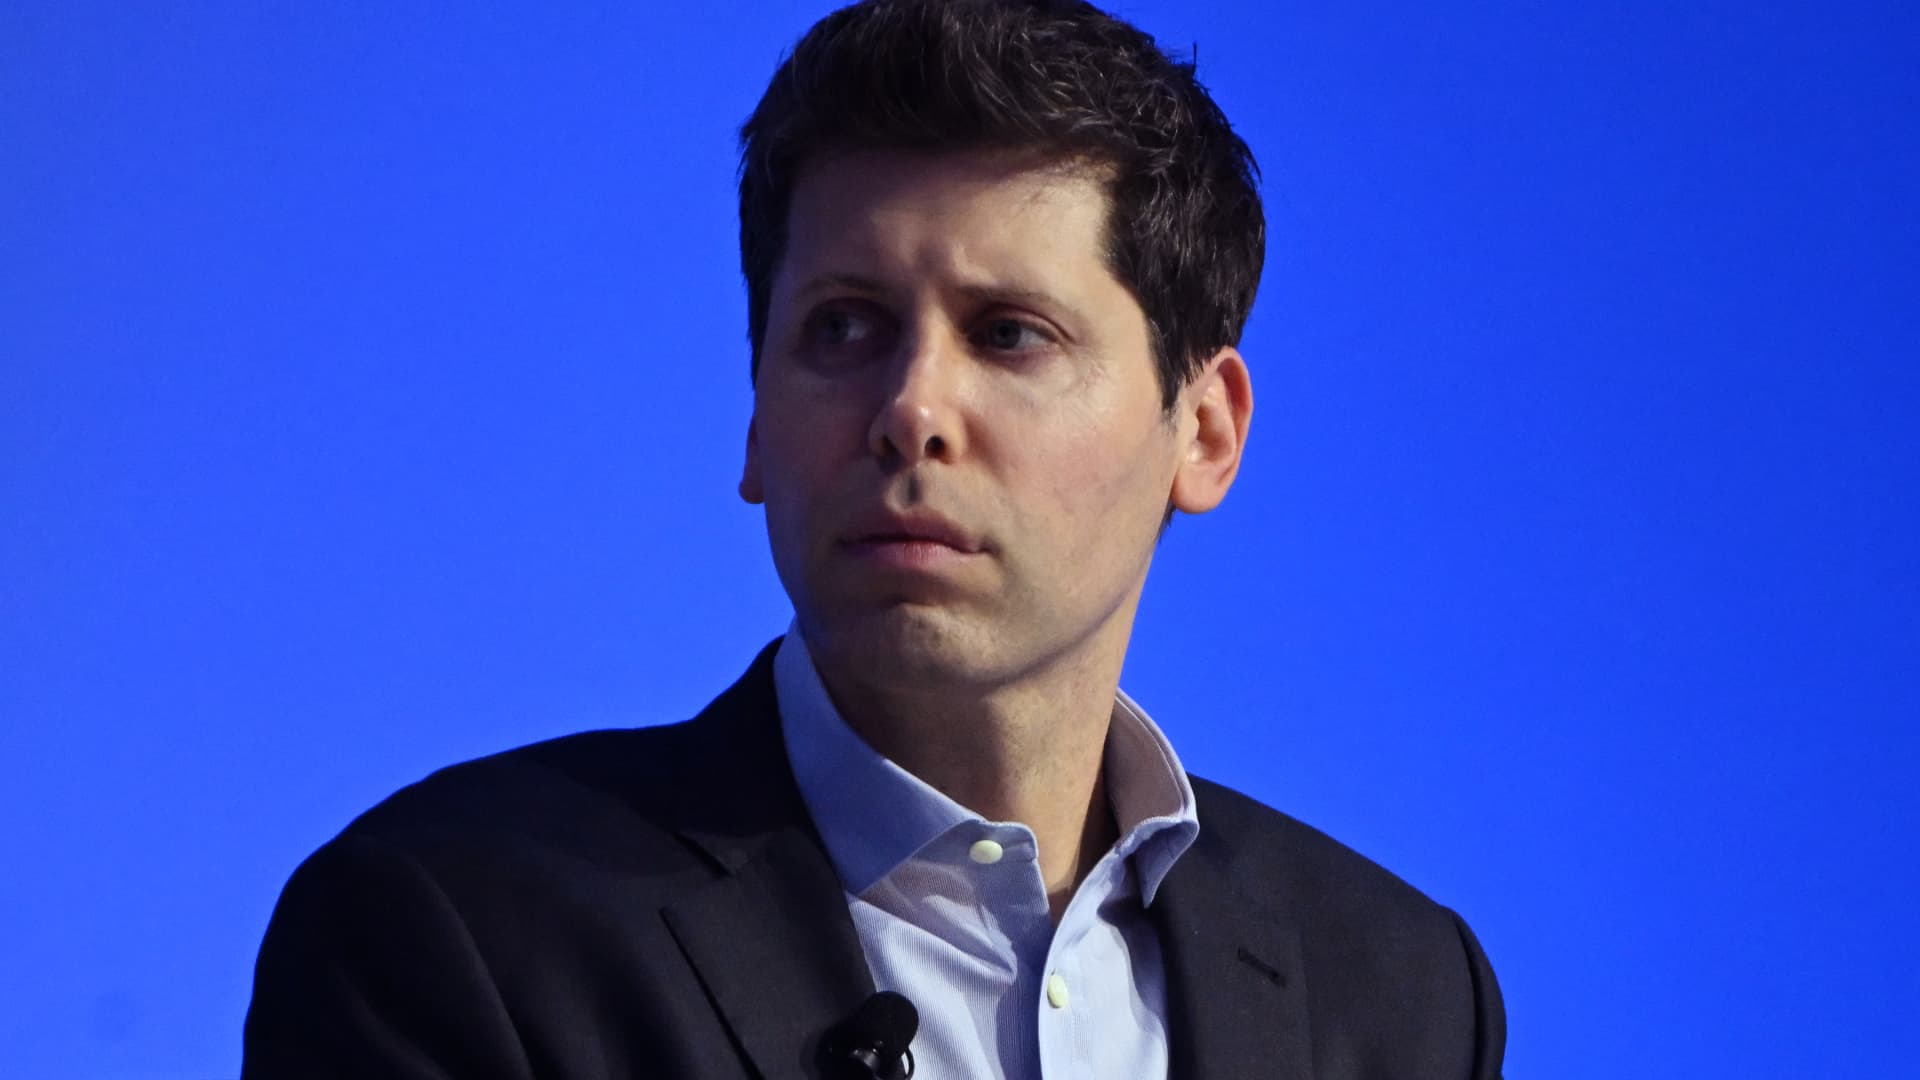 openai-s-sam-altman-exits-as-ceo-because-board-no-longer-has-confidence-in-his-ability-to-lead